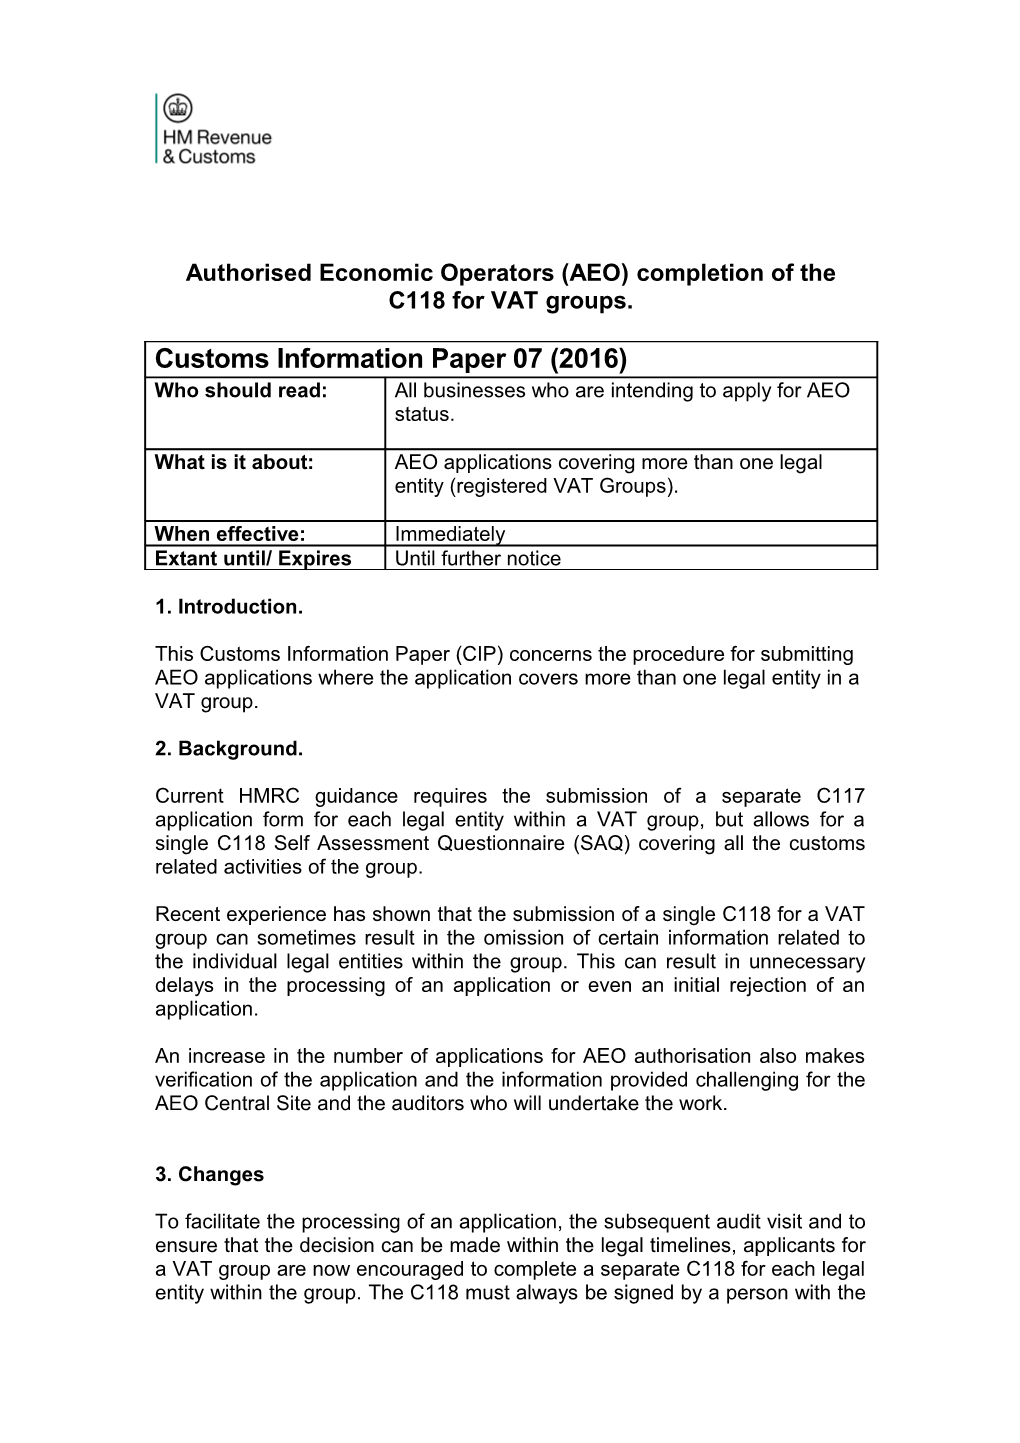 Authorised Economic Operators (AEO) Completion of the C118 for VAT Groups